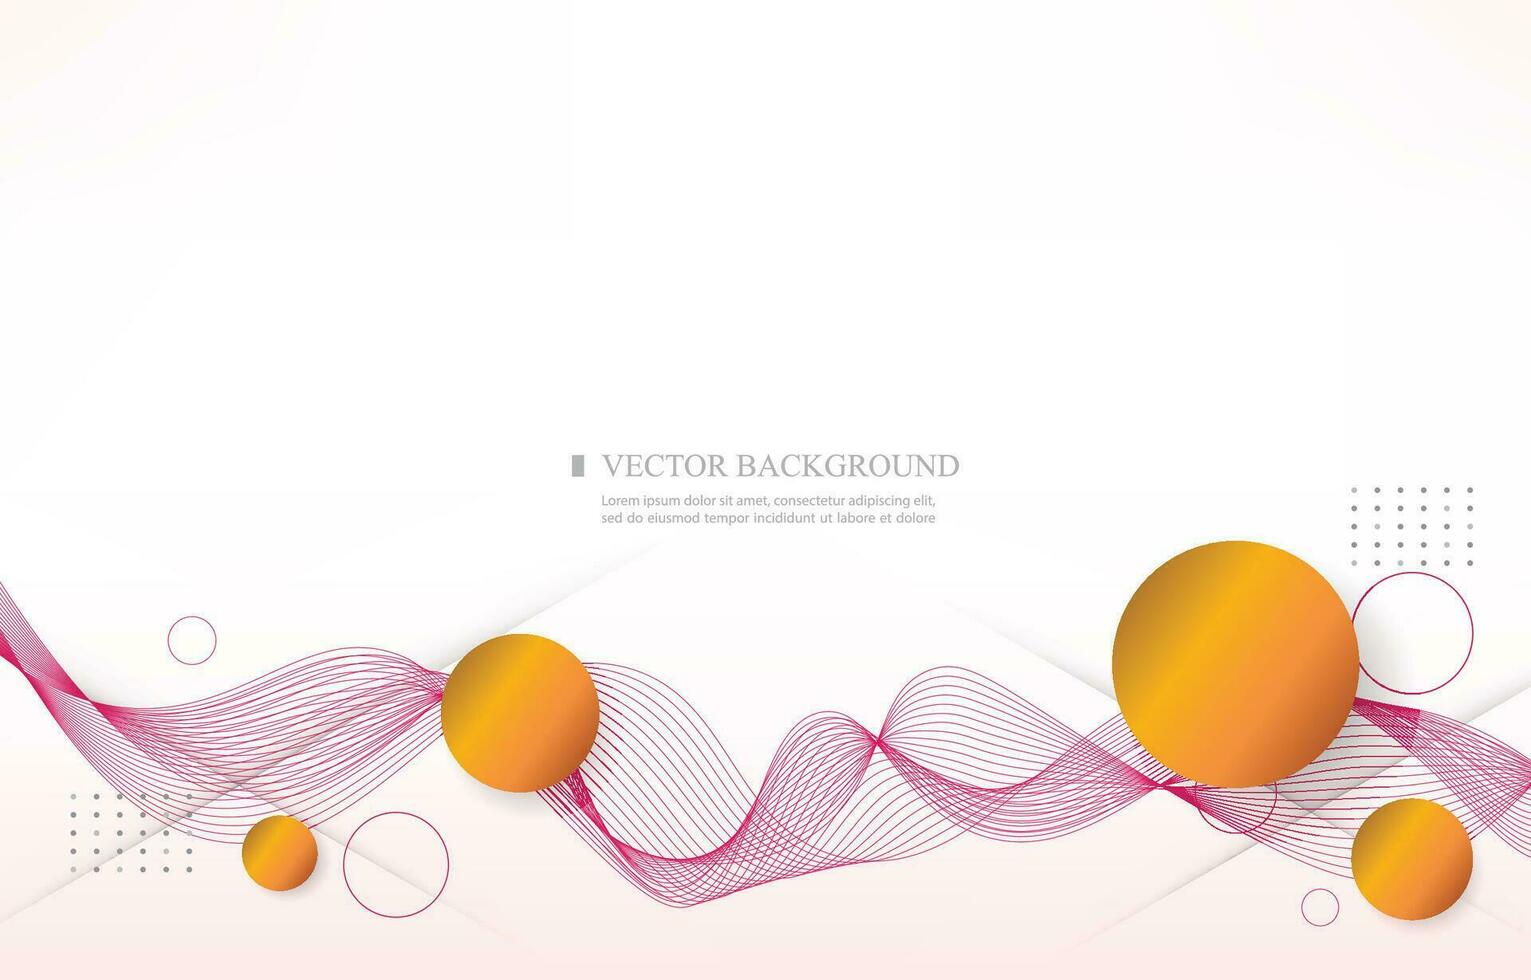 bianca vettore lusso background.wave linee.abstract sfondo.